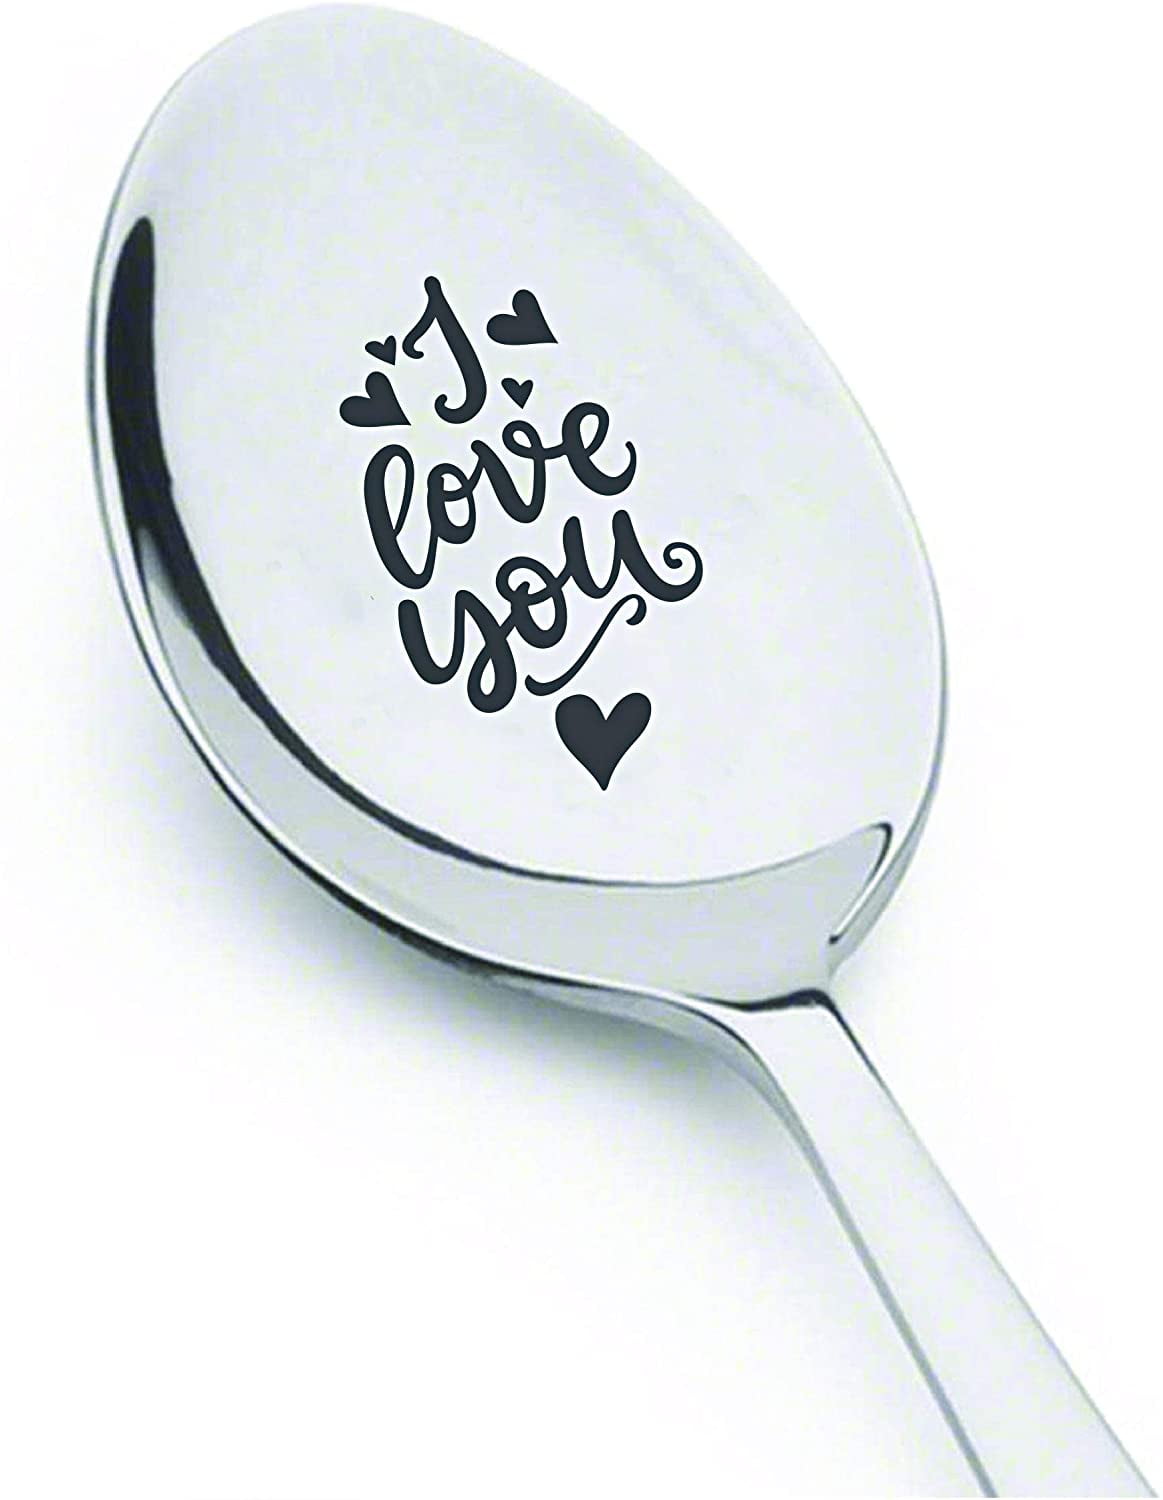 Funny Spoon Gift Love Spoon Engraved Stainless Steel Perfect Birthday/Valentine/Anniversary/Christmas Gift I Love You Gifts for Him Her Best Gift for Girlfriend Wife Husband Boyfriend Friend